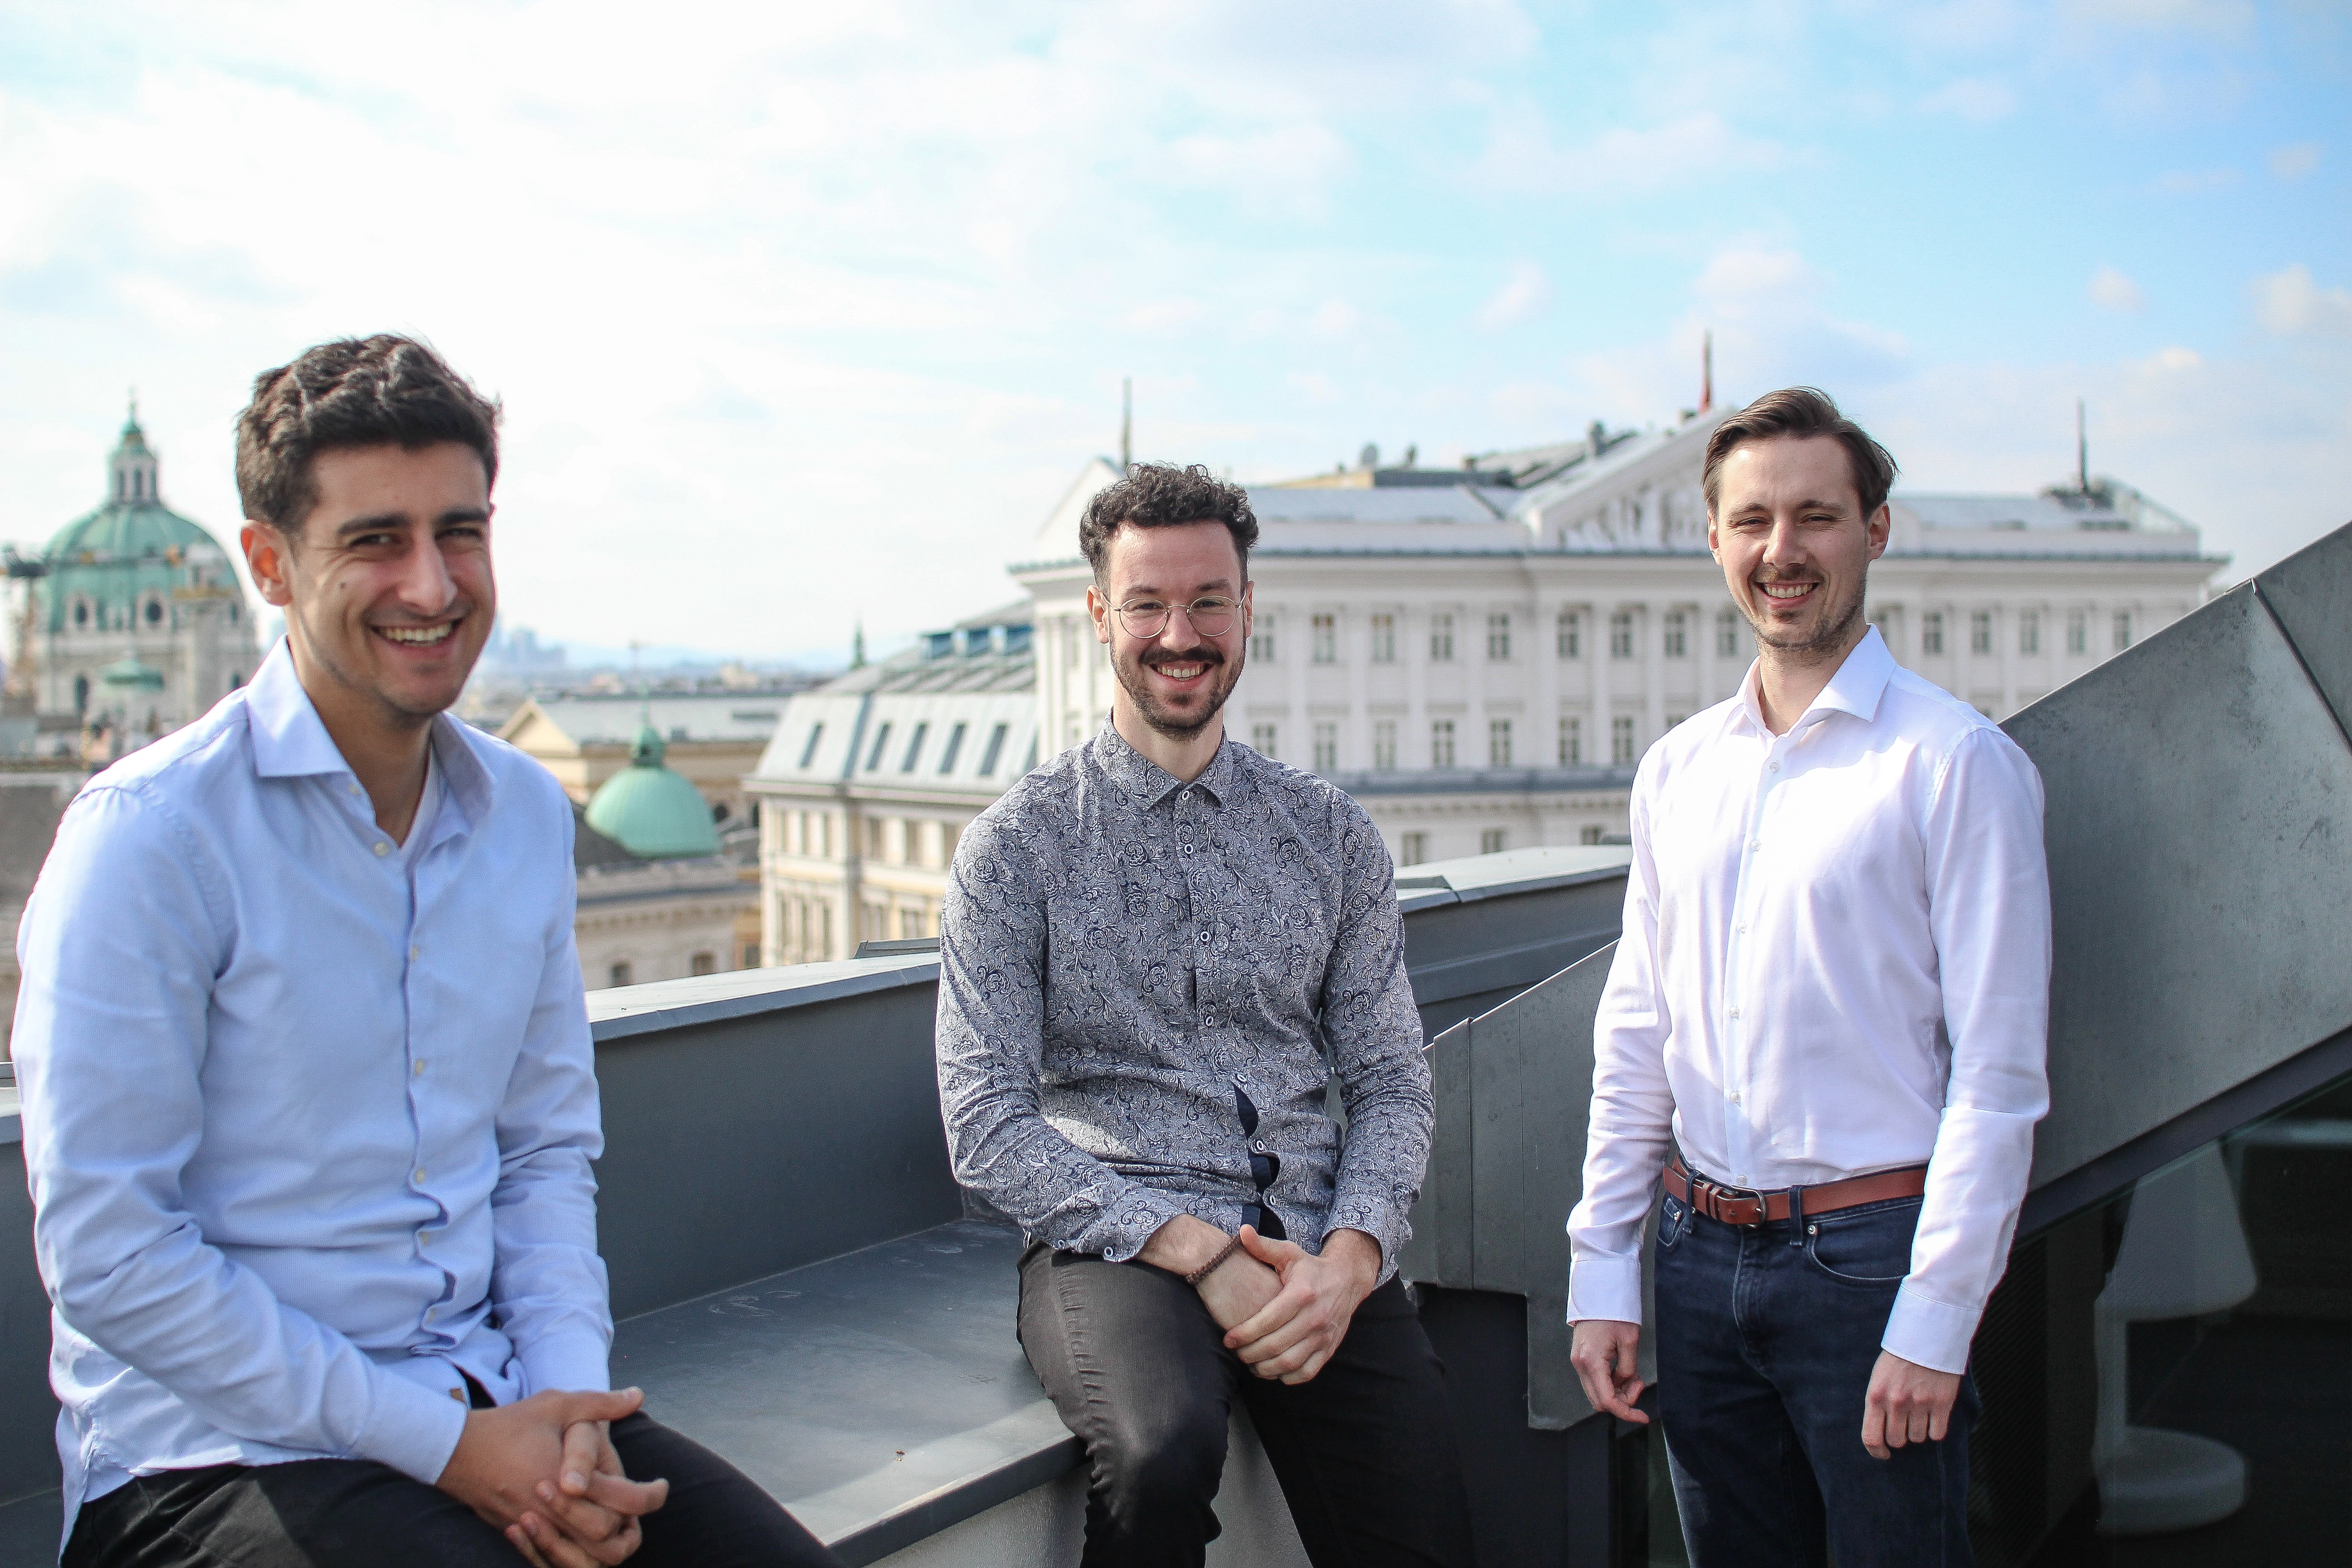 Three of the male founders are standing on a rooftop and smiling at the camera.